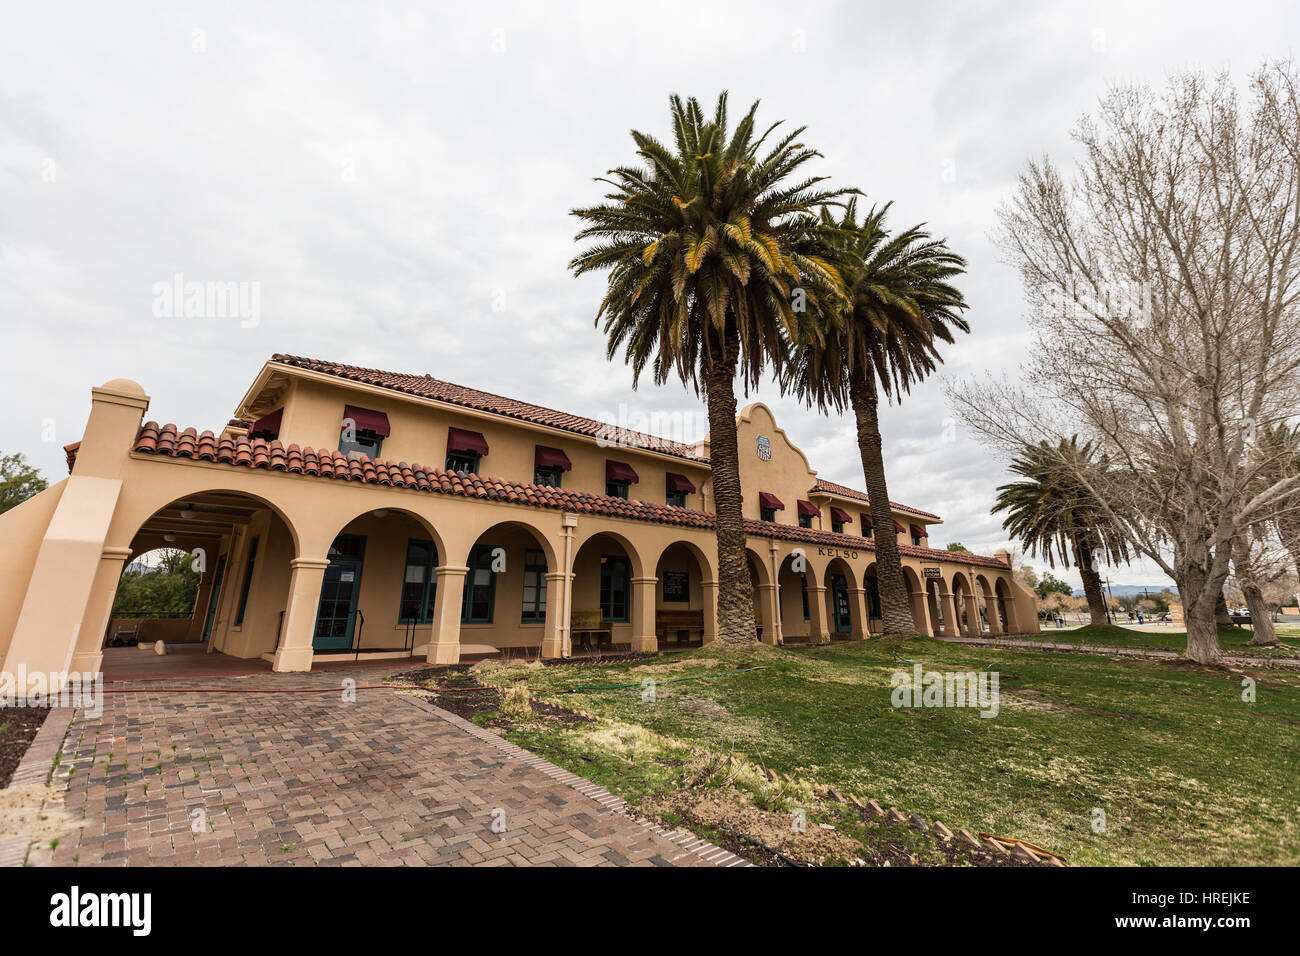 Mojave National Preserve, California, USA - February 21, 2017:  Mojave National Park visitor center at the historic Kelso Train Station. Stock Photo